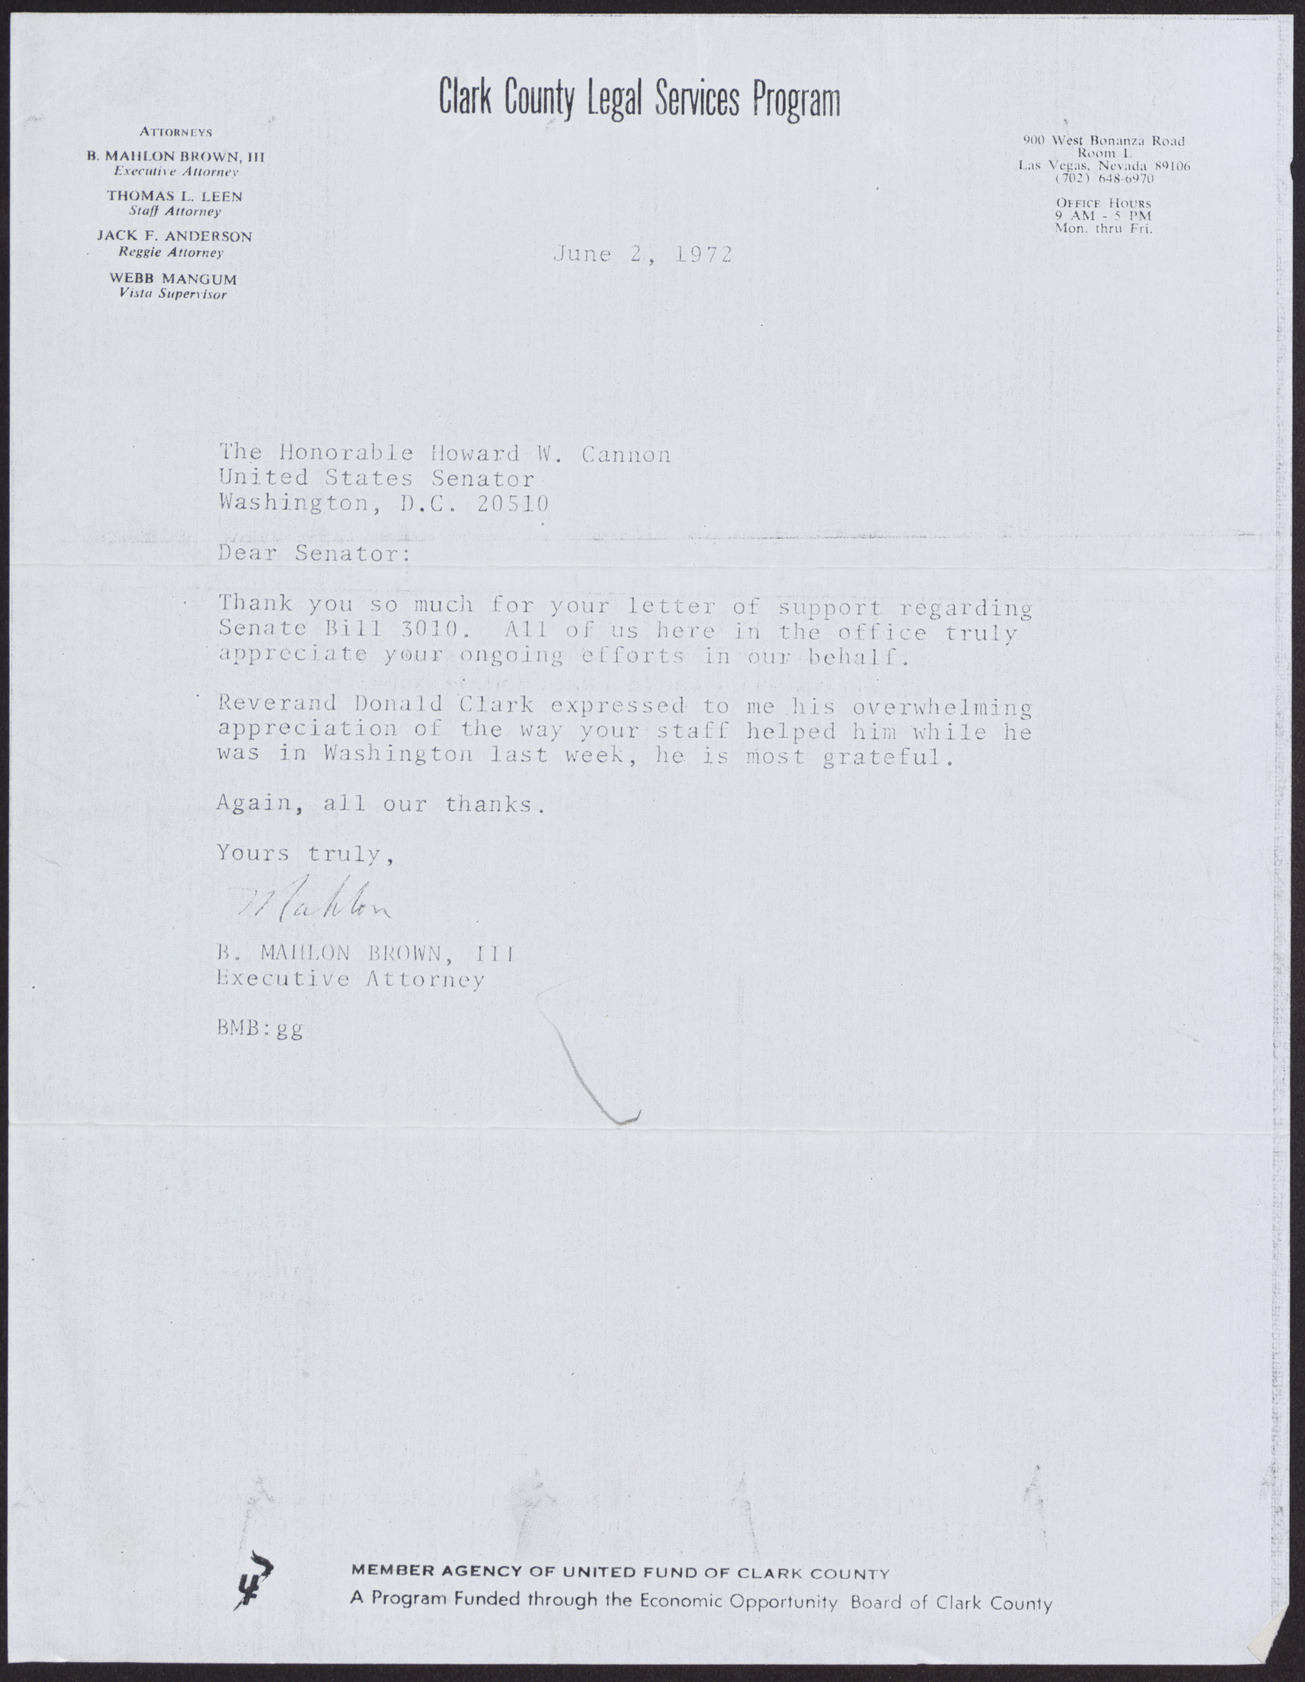 Copy of letter to Senator Howard W. Cannon from B. Mahlon Brown, III, June 2, 1972